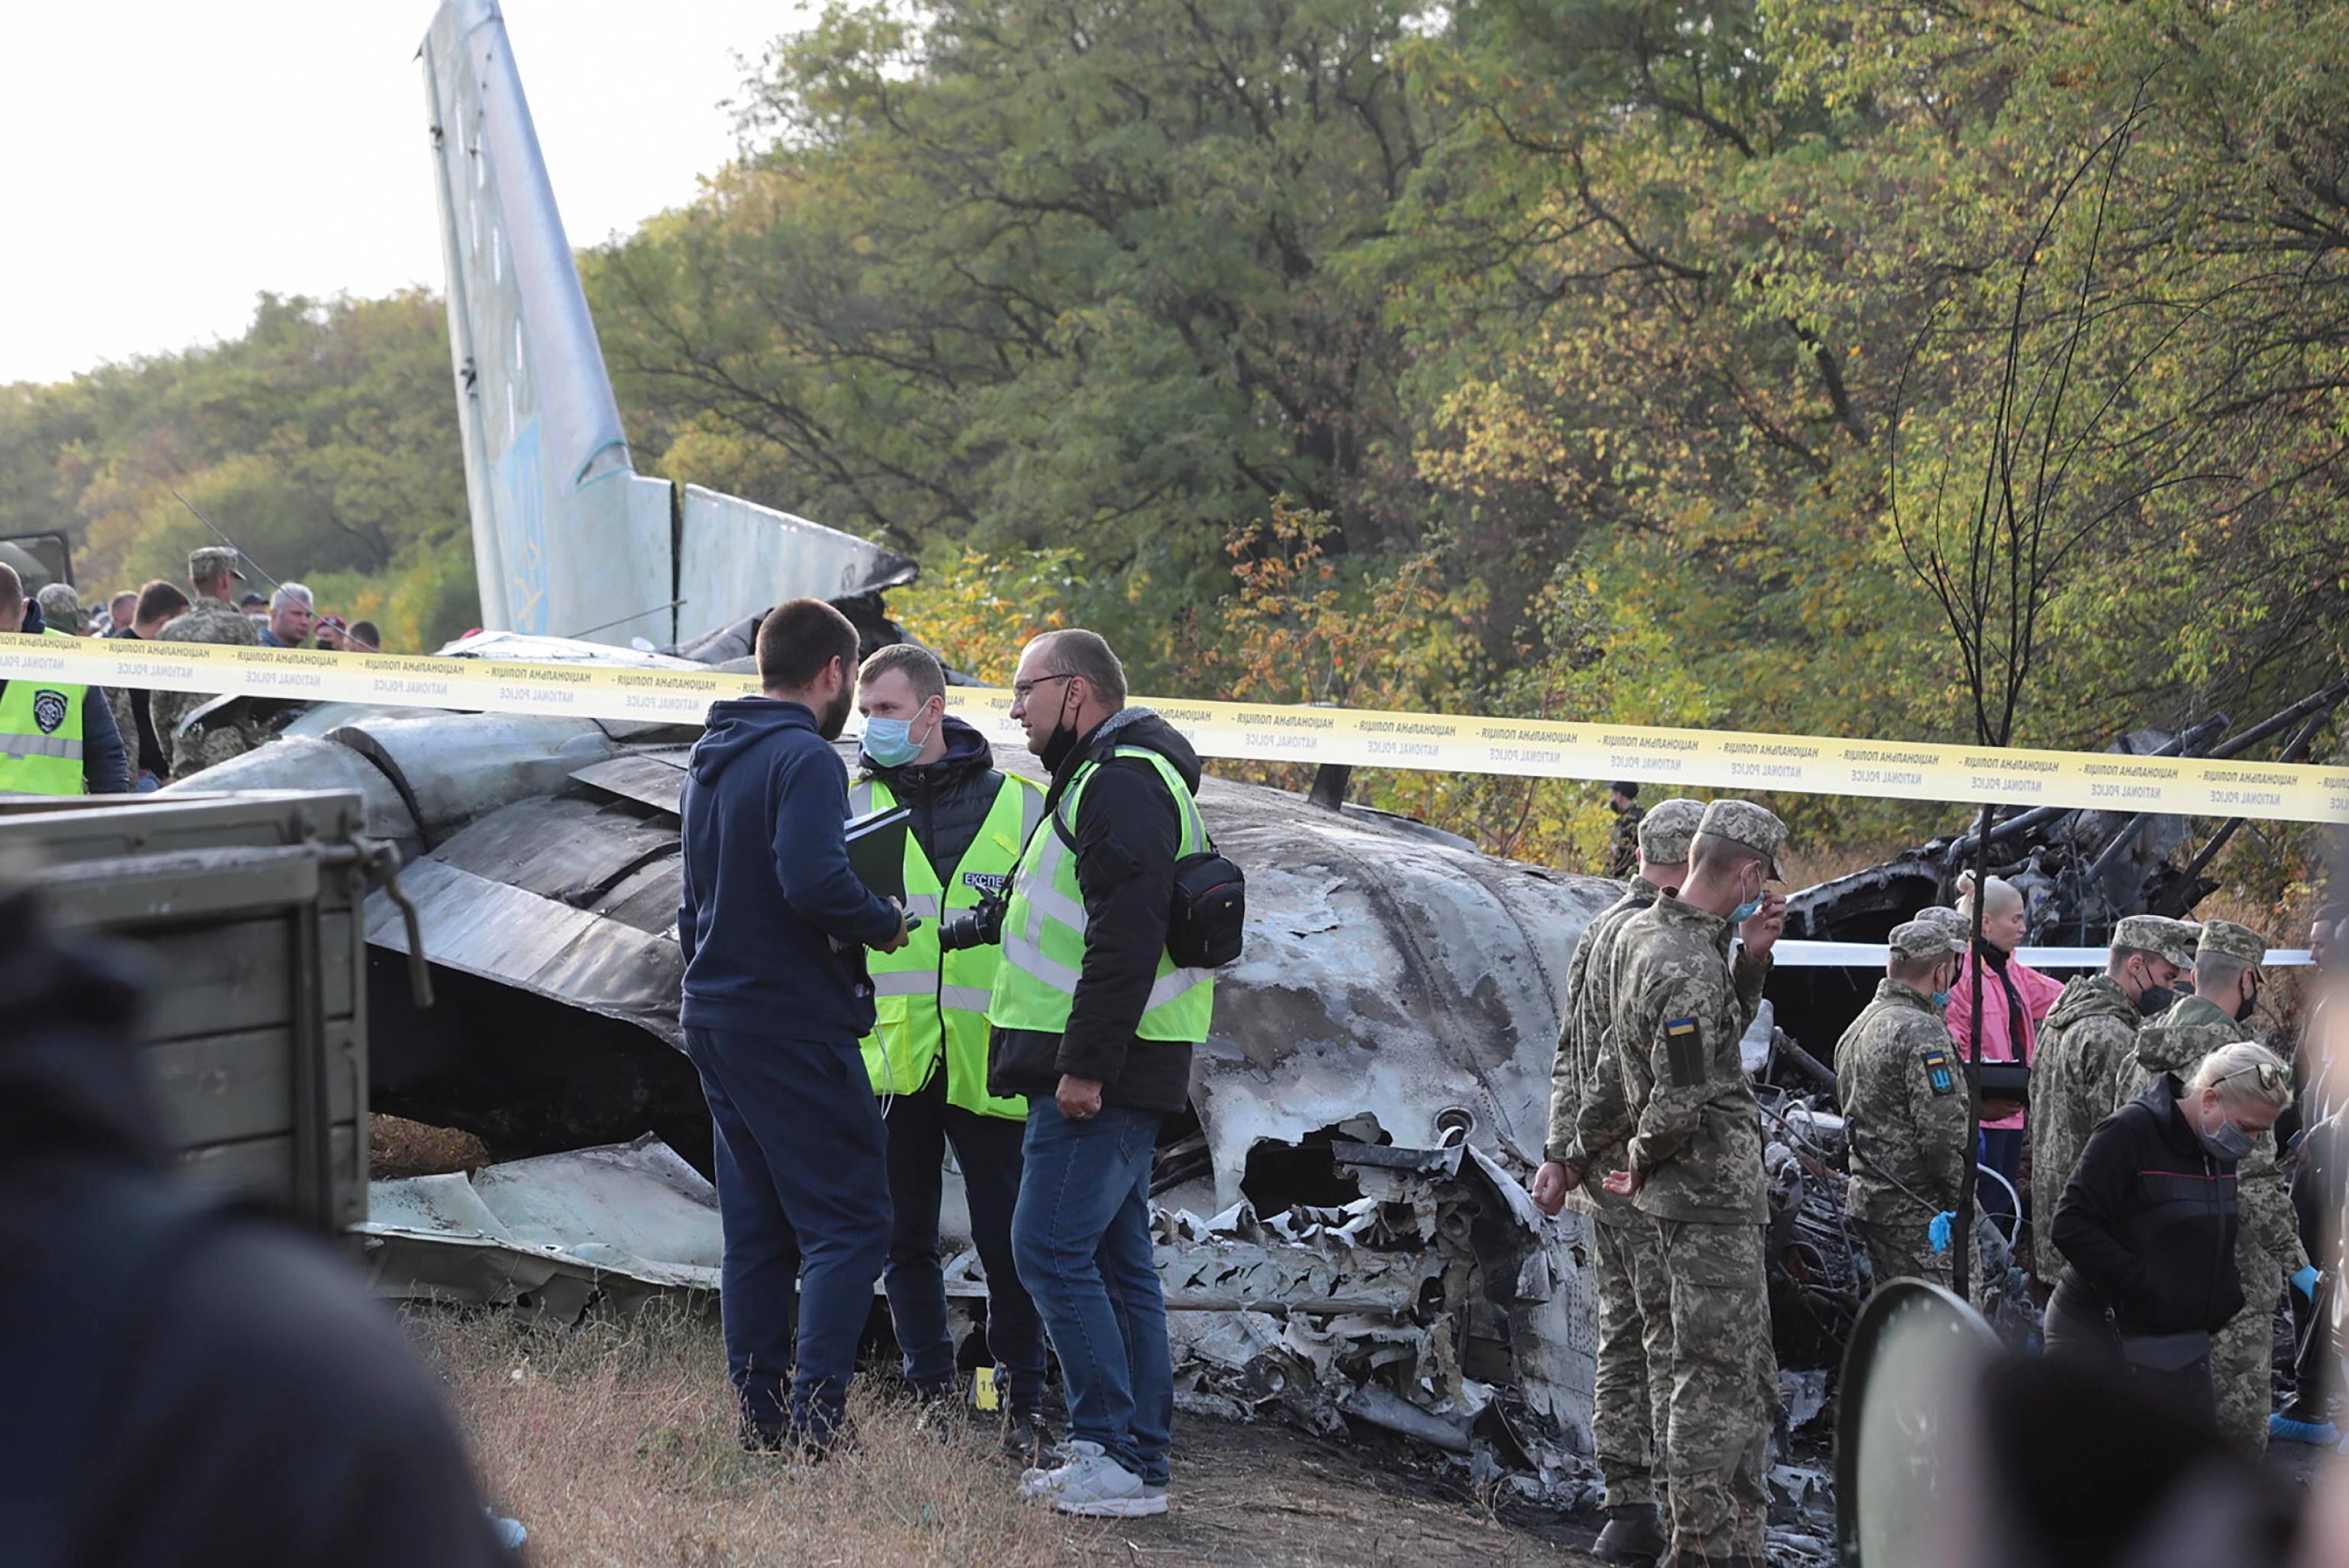 epa08698267 Rescuers inspect the crash site of the An-26 plane near of Chuguev city of Kharkiv's area, Ukraine, 26 September 2020. The An-26 plane of the Ukrainian Air Force crashed while landing at the Chuguev airport in Kharkiv region. Asides from the crew, 21 cadets of the Kharkiv National University of the Air Force were on board because it was a training flight according to preliminary information. A fire broke out during the plane crash. 22 people were killed, two were injured. A total of 28 persons were on board as local media report.  EPA/SERGEY KHRUPOV